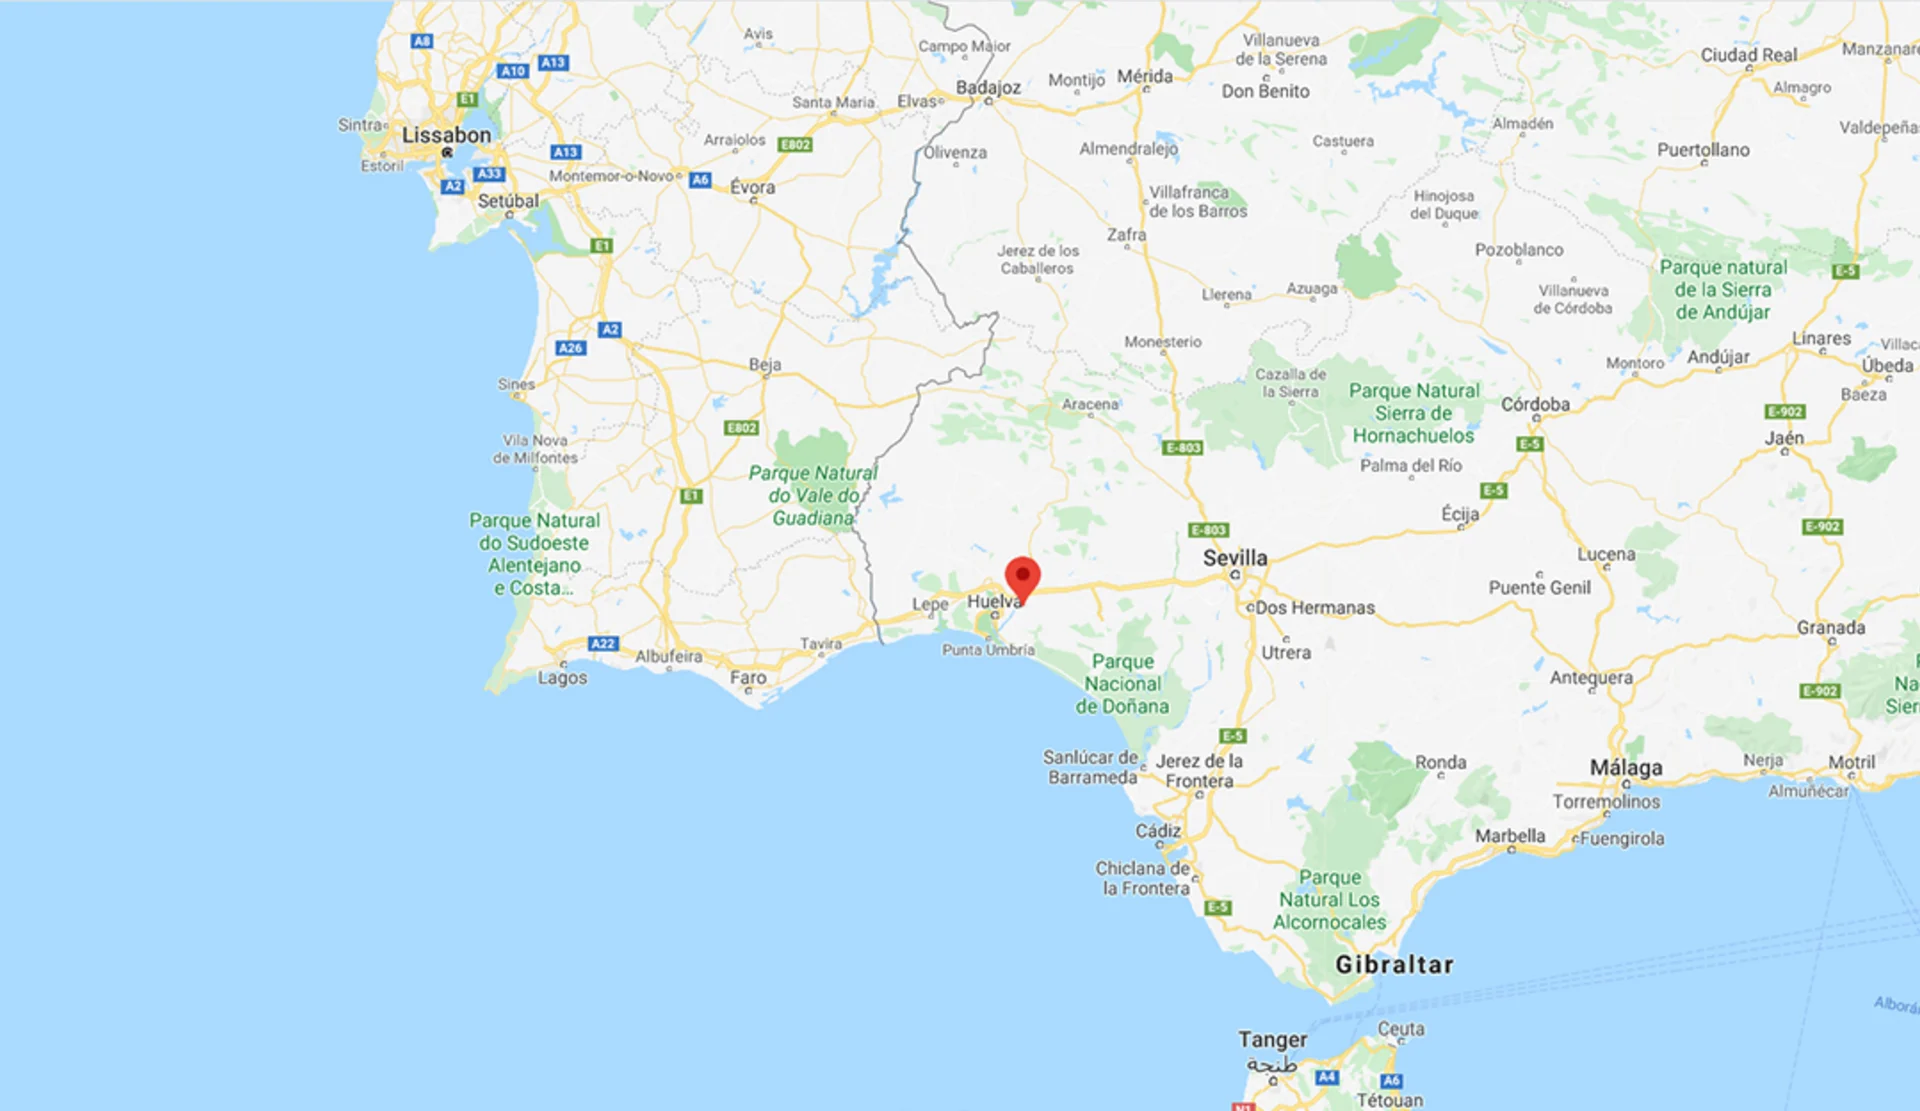 An extract from Google Maps showing southern Andalusia